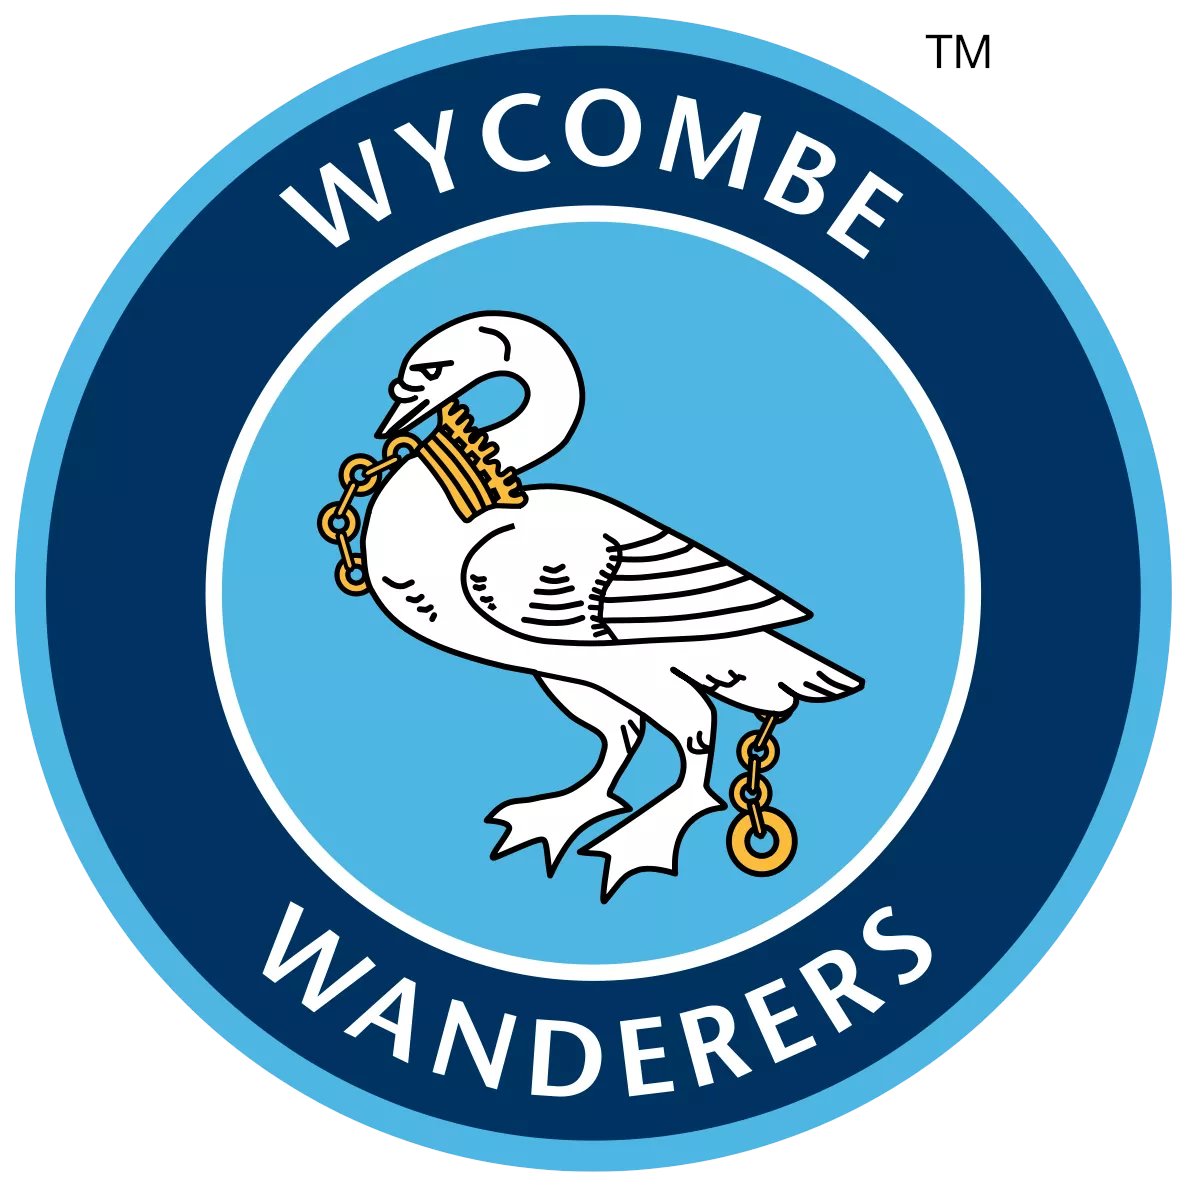 76) Wycombe Wanderers Points: 84 Manager: Eddie Howe. Wycombe have some good players... and a pretty good manager... but I think we can all see where the problem is...